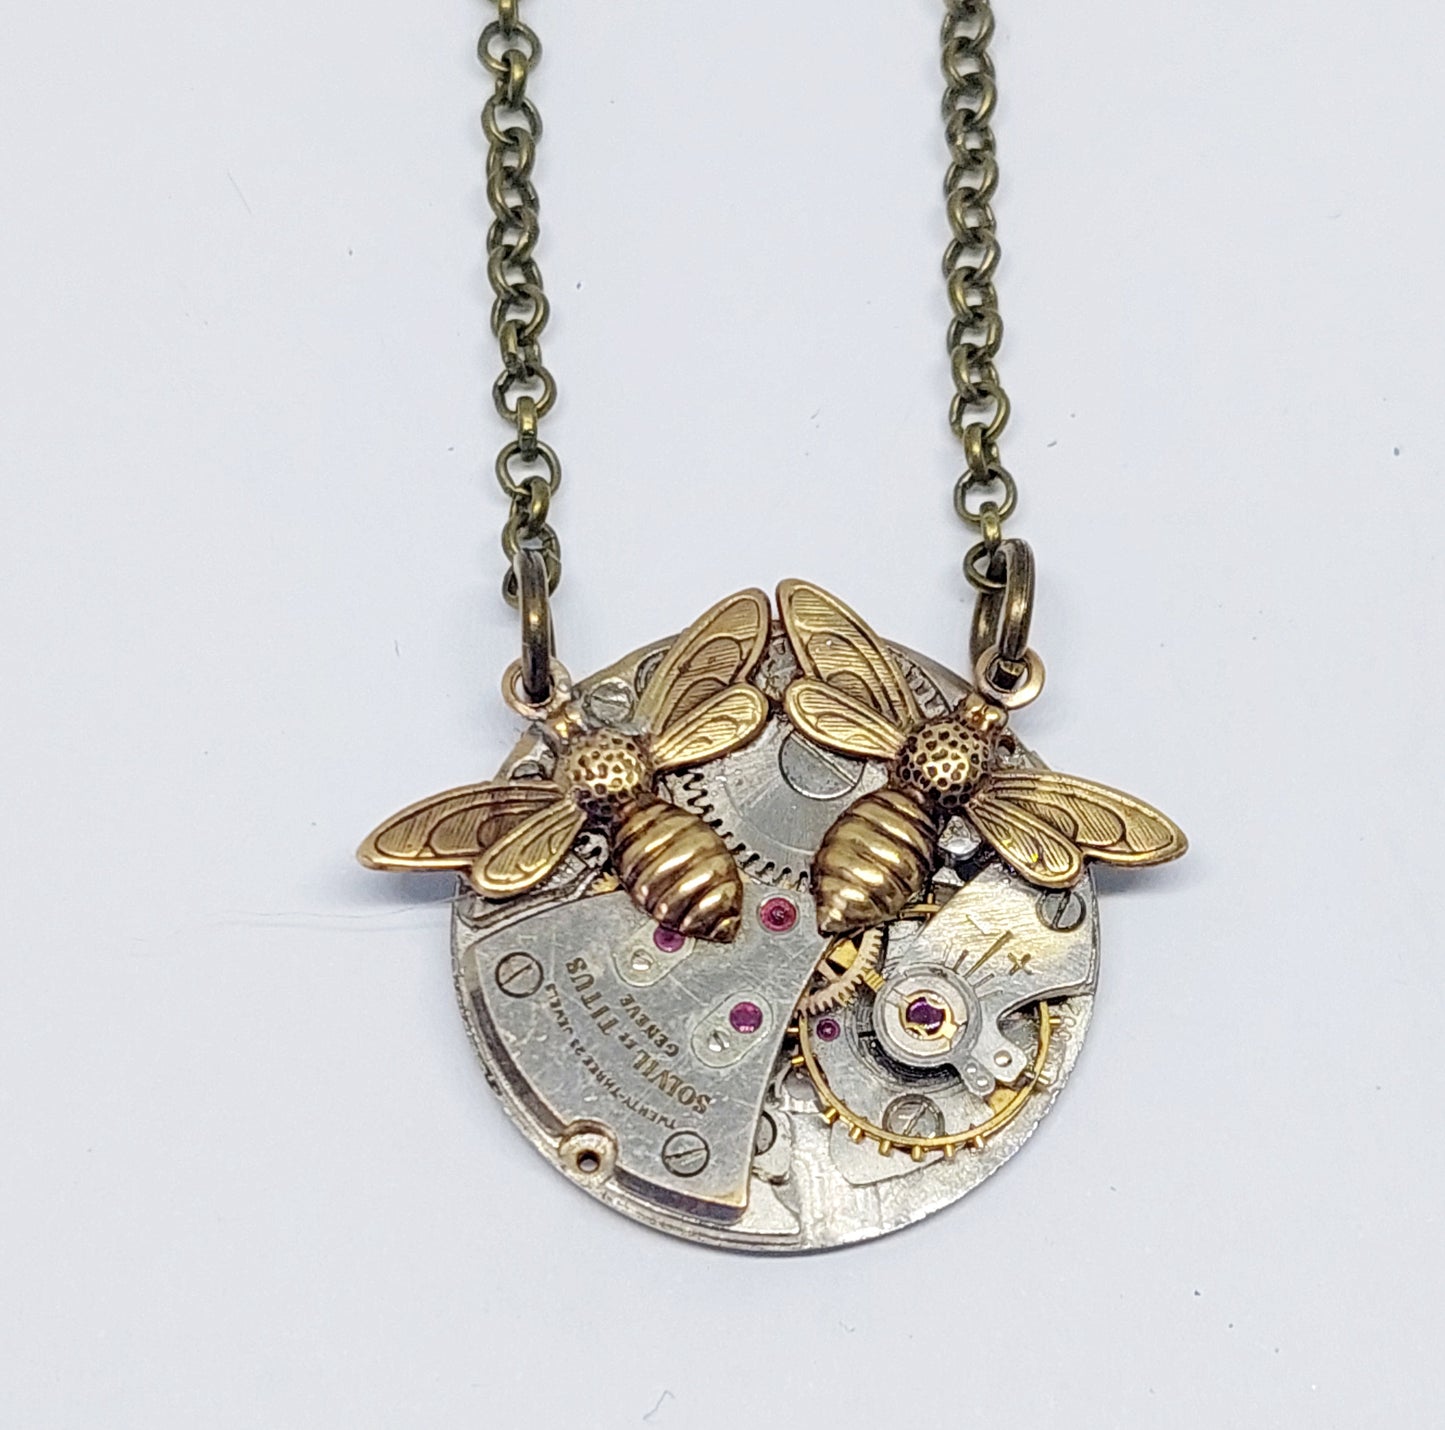 NEW!! Timepiece twin dragonfly or bee pendant - mixed metal